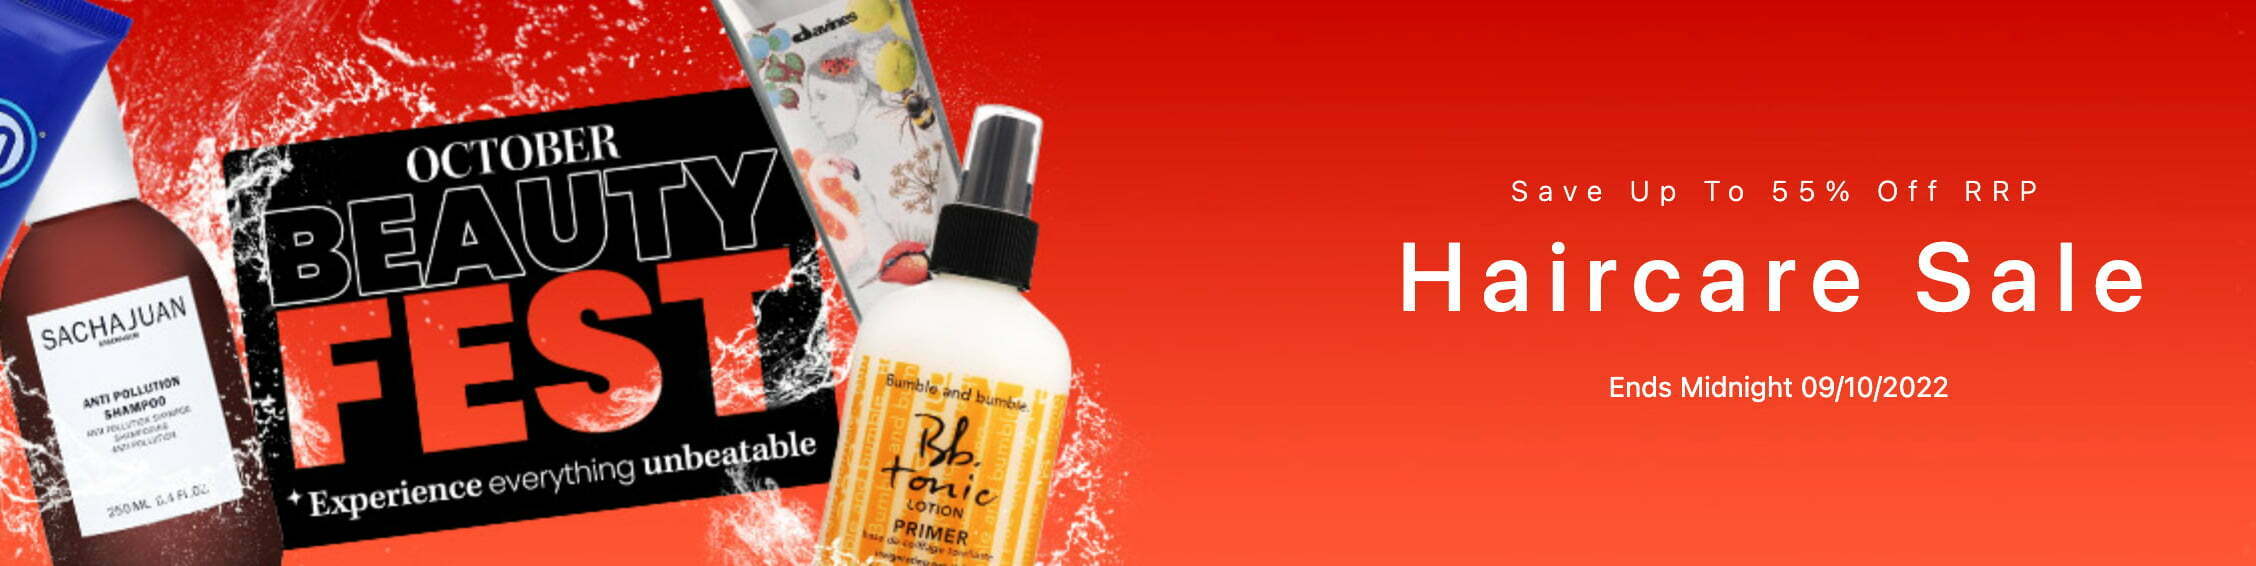 Haircare sale at Allbeauty: up to 55% off selected